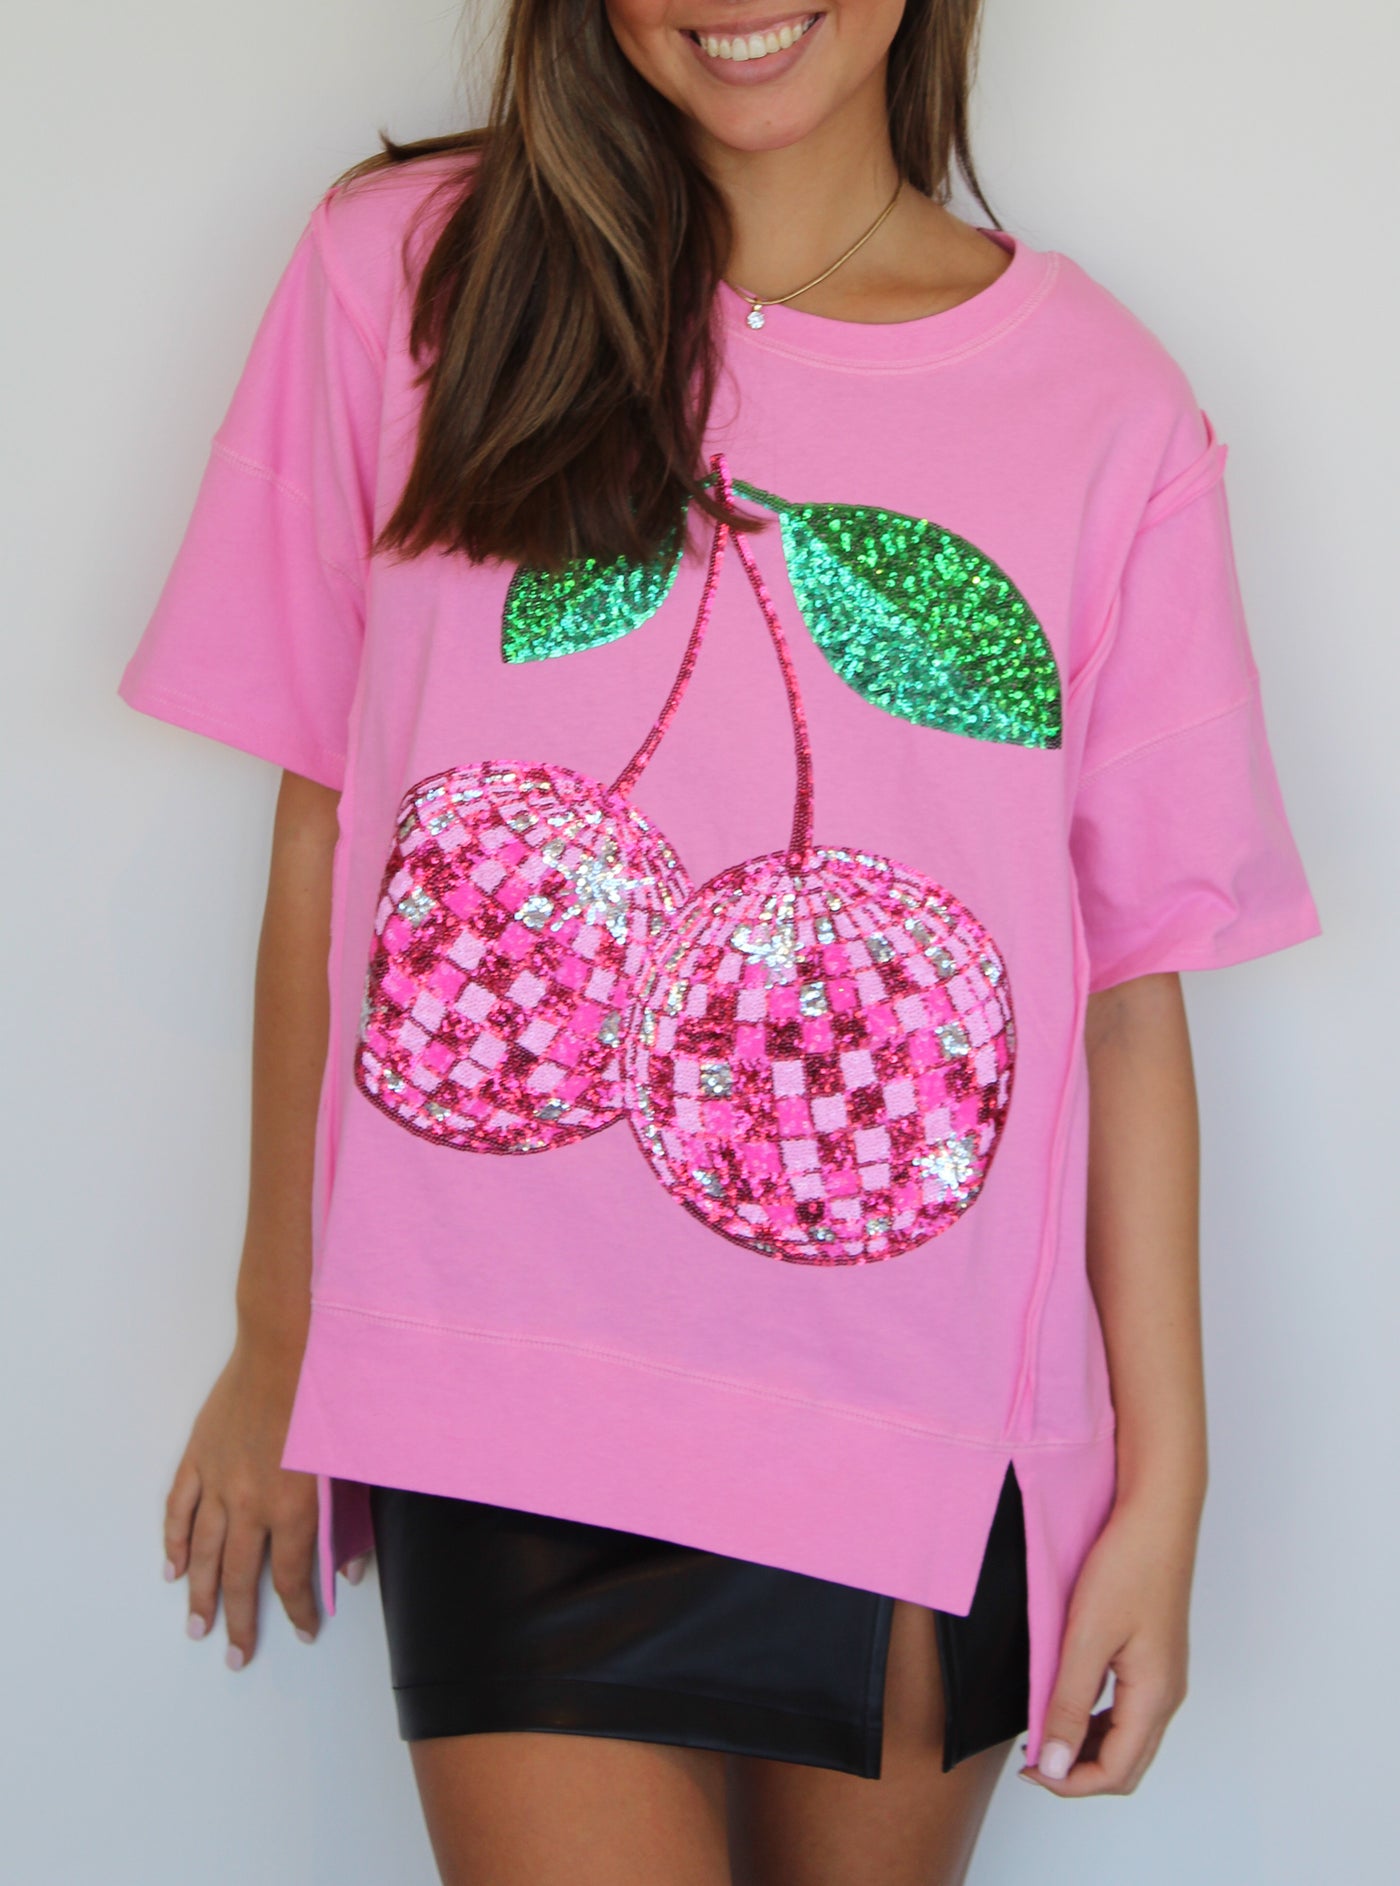 Sequin Cherry Oversized Tee-120 - TOPS - GRAPHIC TEES-FANTASTIC FAWN-[option4]-[option5]-[option6]-Leather & Lace Boutique Shop